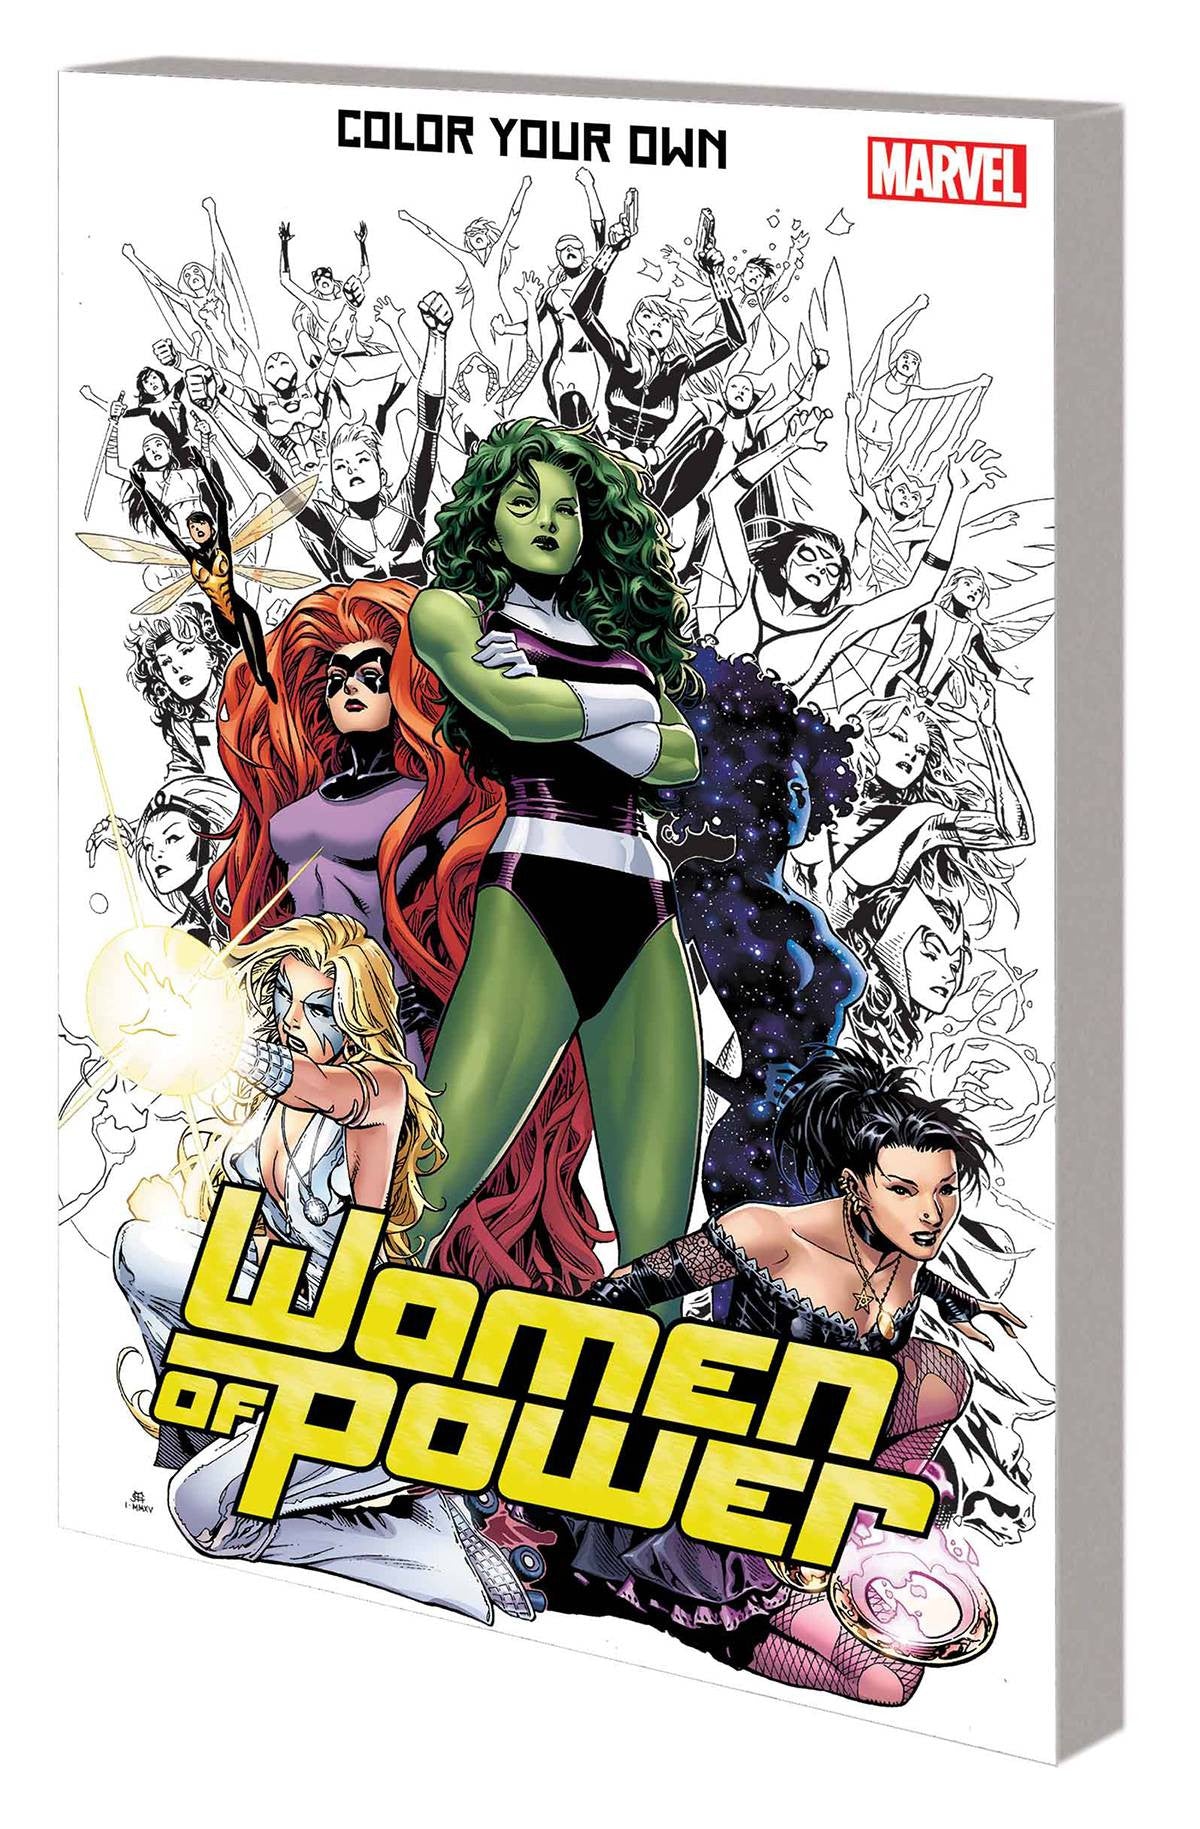 COLOUR YOUR OWN WOMEN OF POWER TP COVER